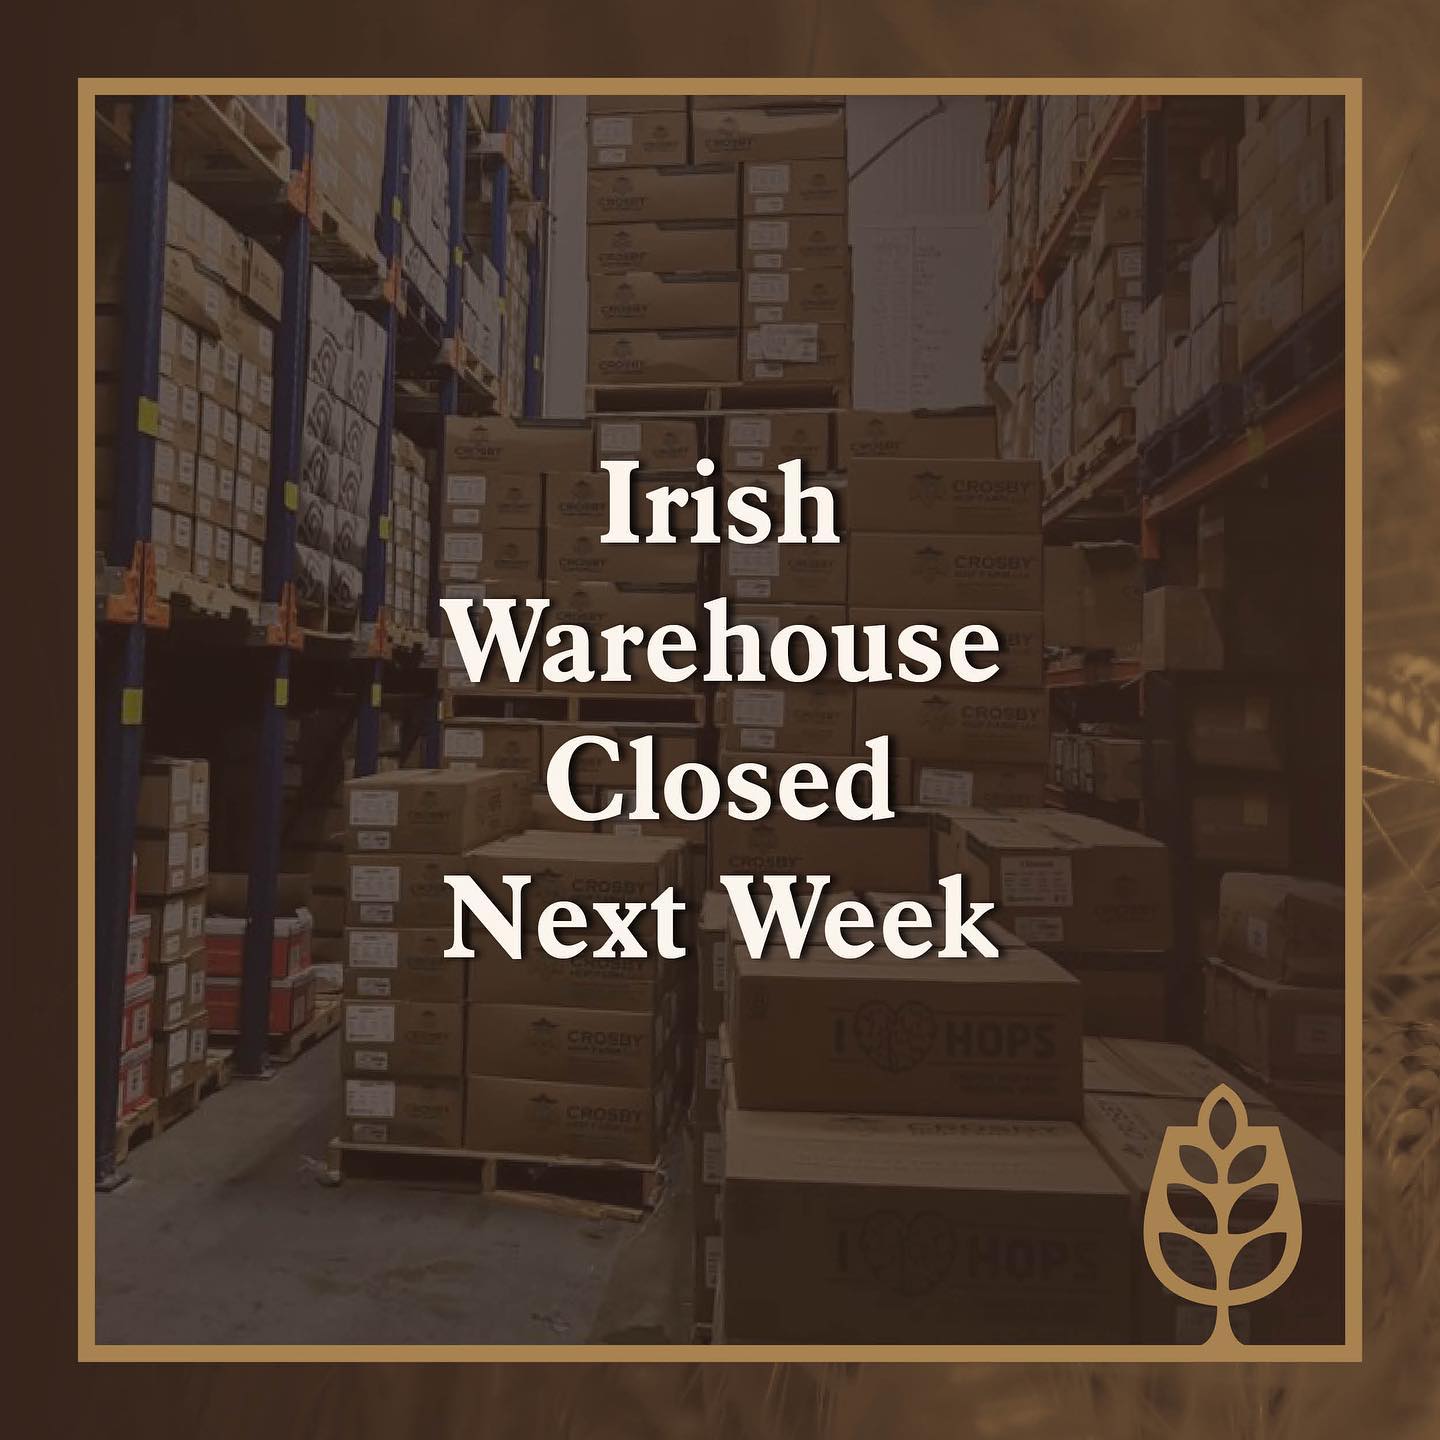 🇮🇪Irish Warehouse Closed For Holiday🇮🇪

We've had a busy few months over at our Irish warehouse and we're gearing up for what promises to be a very exciting summer!☀️ 

Our immensely hard working team in Ireland are going to be taking a well-earned holiday next week so our warehouse will be closed from Monday 4th July with normal service resuming on Monday 11th July. 

Our UK operations and deliveries will not be affected and all orders for UK customers will be processed as normal. 

Thank you for your understanding. We're sure you'd like to join us in saying a huge thank you to our warehouse team for getting you all the goods you need to brew great beer! We couldn't do it without them! 🍻